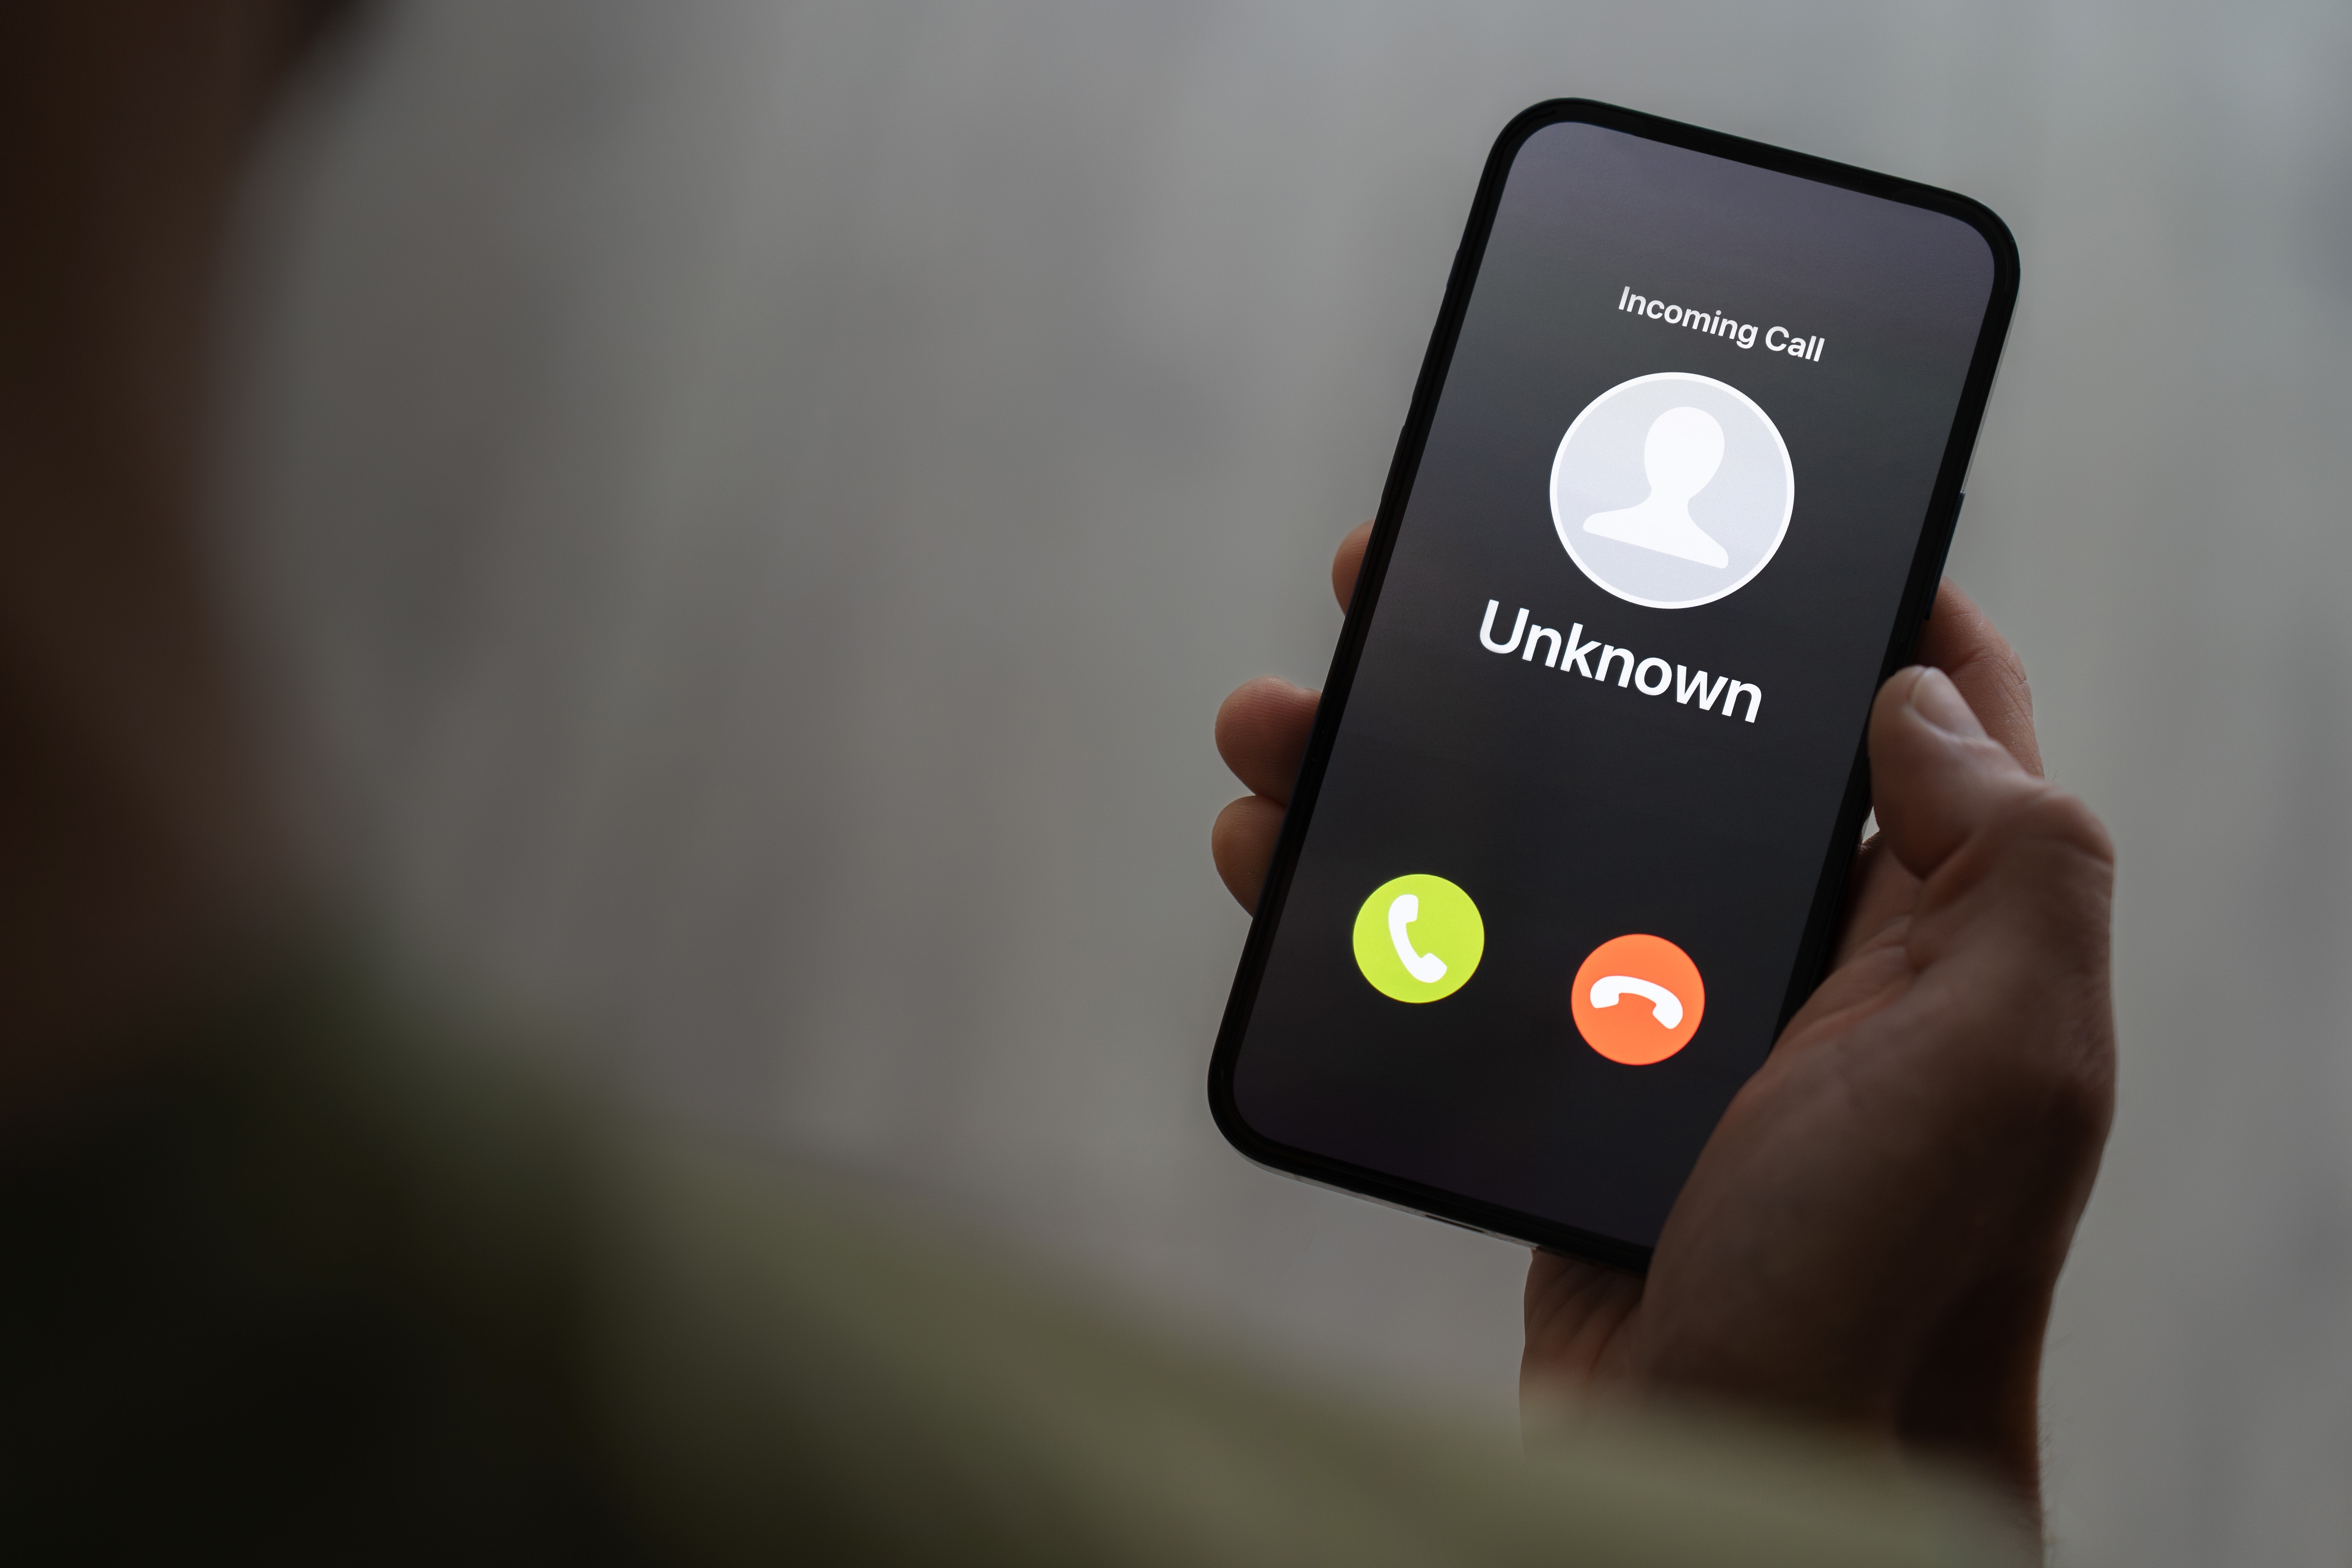 Person holding ringing phone with unknown caller. | Source: Shutterstock